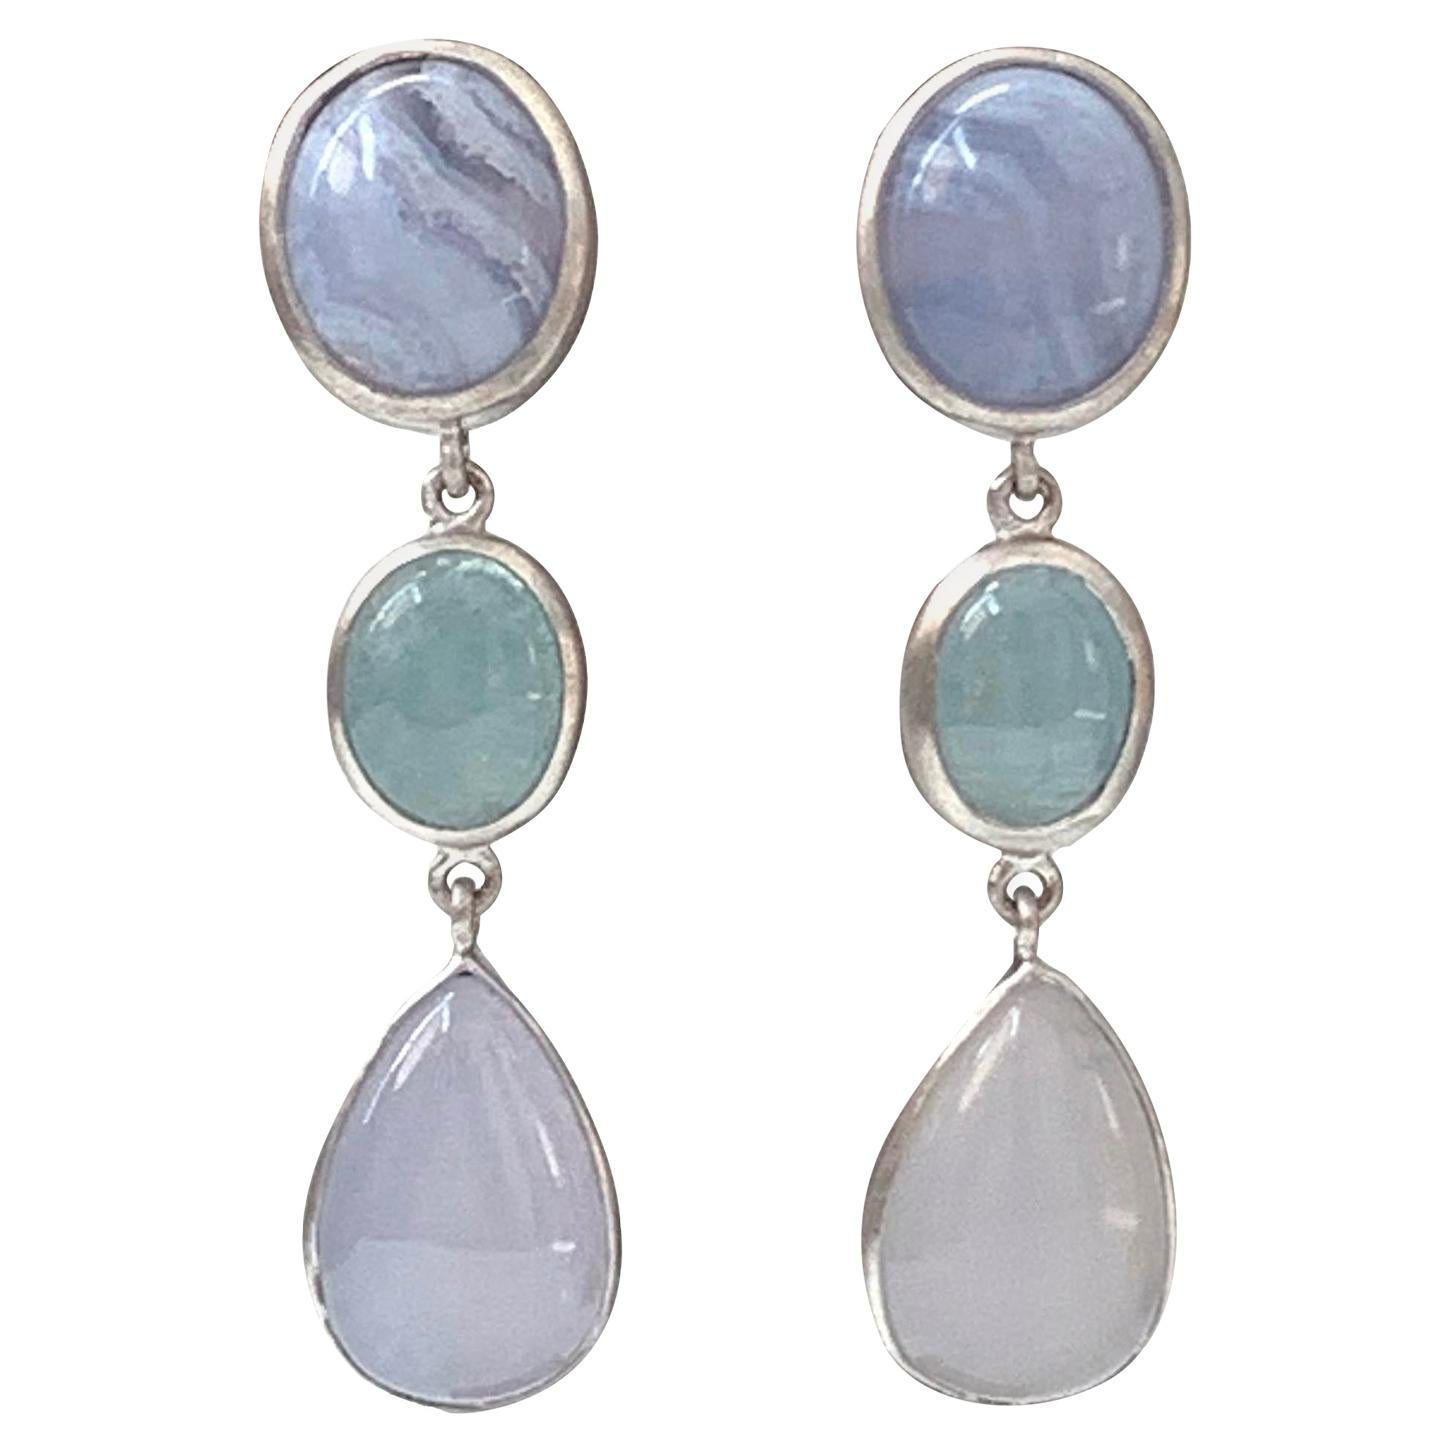 Triple Cabochon Chalcedony and Aquamarine Dangle Sterling Silver Earrings